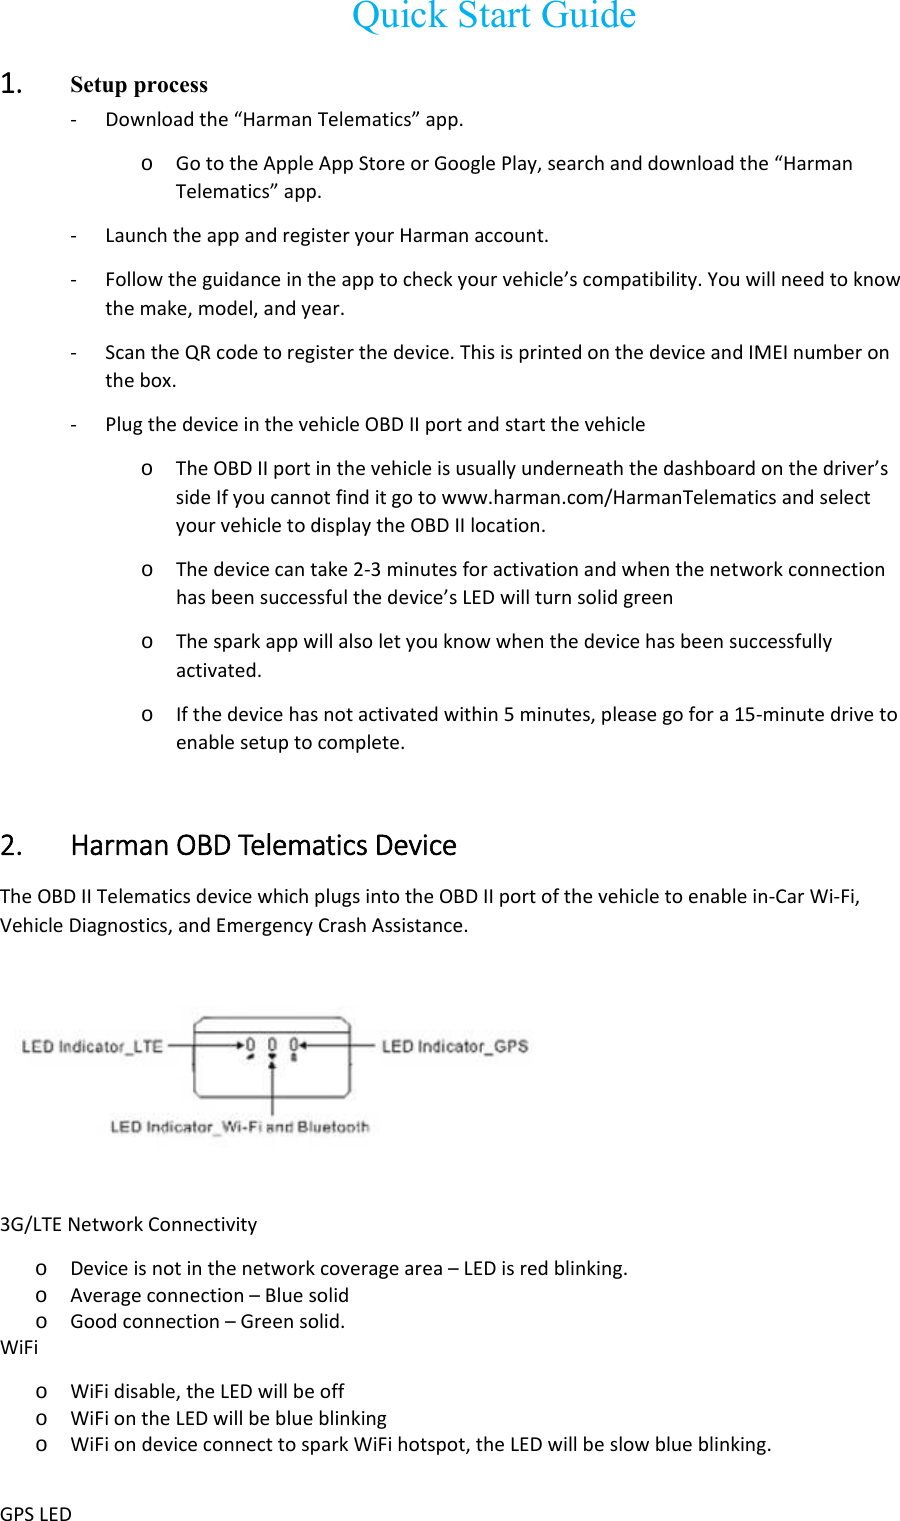   Quick Start Guide 1. Setup process ‐ Downloadthe“HarmanTelematics”app.o GototheAppleAppStoreorGooglePlay,searchanddownloadthe“HarmanTelematics”app.‐ LaunchtheappandregisteryourHarmanaccount.‐ Followtheguidanceintheapptocheckyourvehicle’scompatibility.Youwillneedtoknowthemake,model,andyear.‐ ScantheQRcodetoregisterthedevice.ThisisprintedonthedeviceandIMEInumberonthebox.‐ PlugthedeviceinthevehicleOBDIIportandstartthevehicleo TheOBDIIportinthevehicleisusuallyunderneaththedashboardonthedriver’ssideIfyoucannotfinditgotowww.harman.com/HarmanTelematicsandselectyourvehicletodisplaytheOBDIIlocation.o Thedevicecantake2‐3minutesforactivationandwhenthenetworkconnectionhasbeensuccessfulthedevice’sLEDwillturnsolidgreeno Thesparkappwillalsoletyouknowwhenthedevicehasbeensuccessfullyactivated.o Ifthedevicehasnotactivatedwithin5minutes,pleasegofora15‐minutedrivetoenablesetuptocomplete.2. HarmanOBDTelematicsDevice  TheOBDIITelematicsdevicewhichplugsintotheOBDIIportofthevehicletoenablein‐CarWi‐Fi,VehicleDiagnostics,andEmergencyCrashAssistance.3G/LTENetworkConnectivityo Deviceisnotinthenetworkcoveragearea–LEDisredblinking.o Averageconnection–Bluesolido Goodconnection–Greensolid.WiFio WiFidisable,theLEDwillbeoffo WiFiontheLEDwillbeblueblinkingo WiFiondeviceconnecttosparkWiFihotspot,theLEDwillbeslowblueblinking.GPSLED